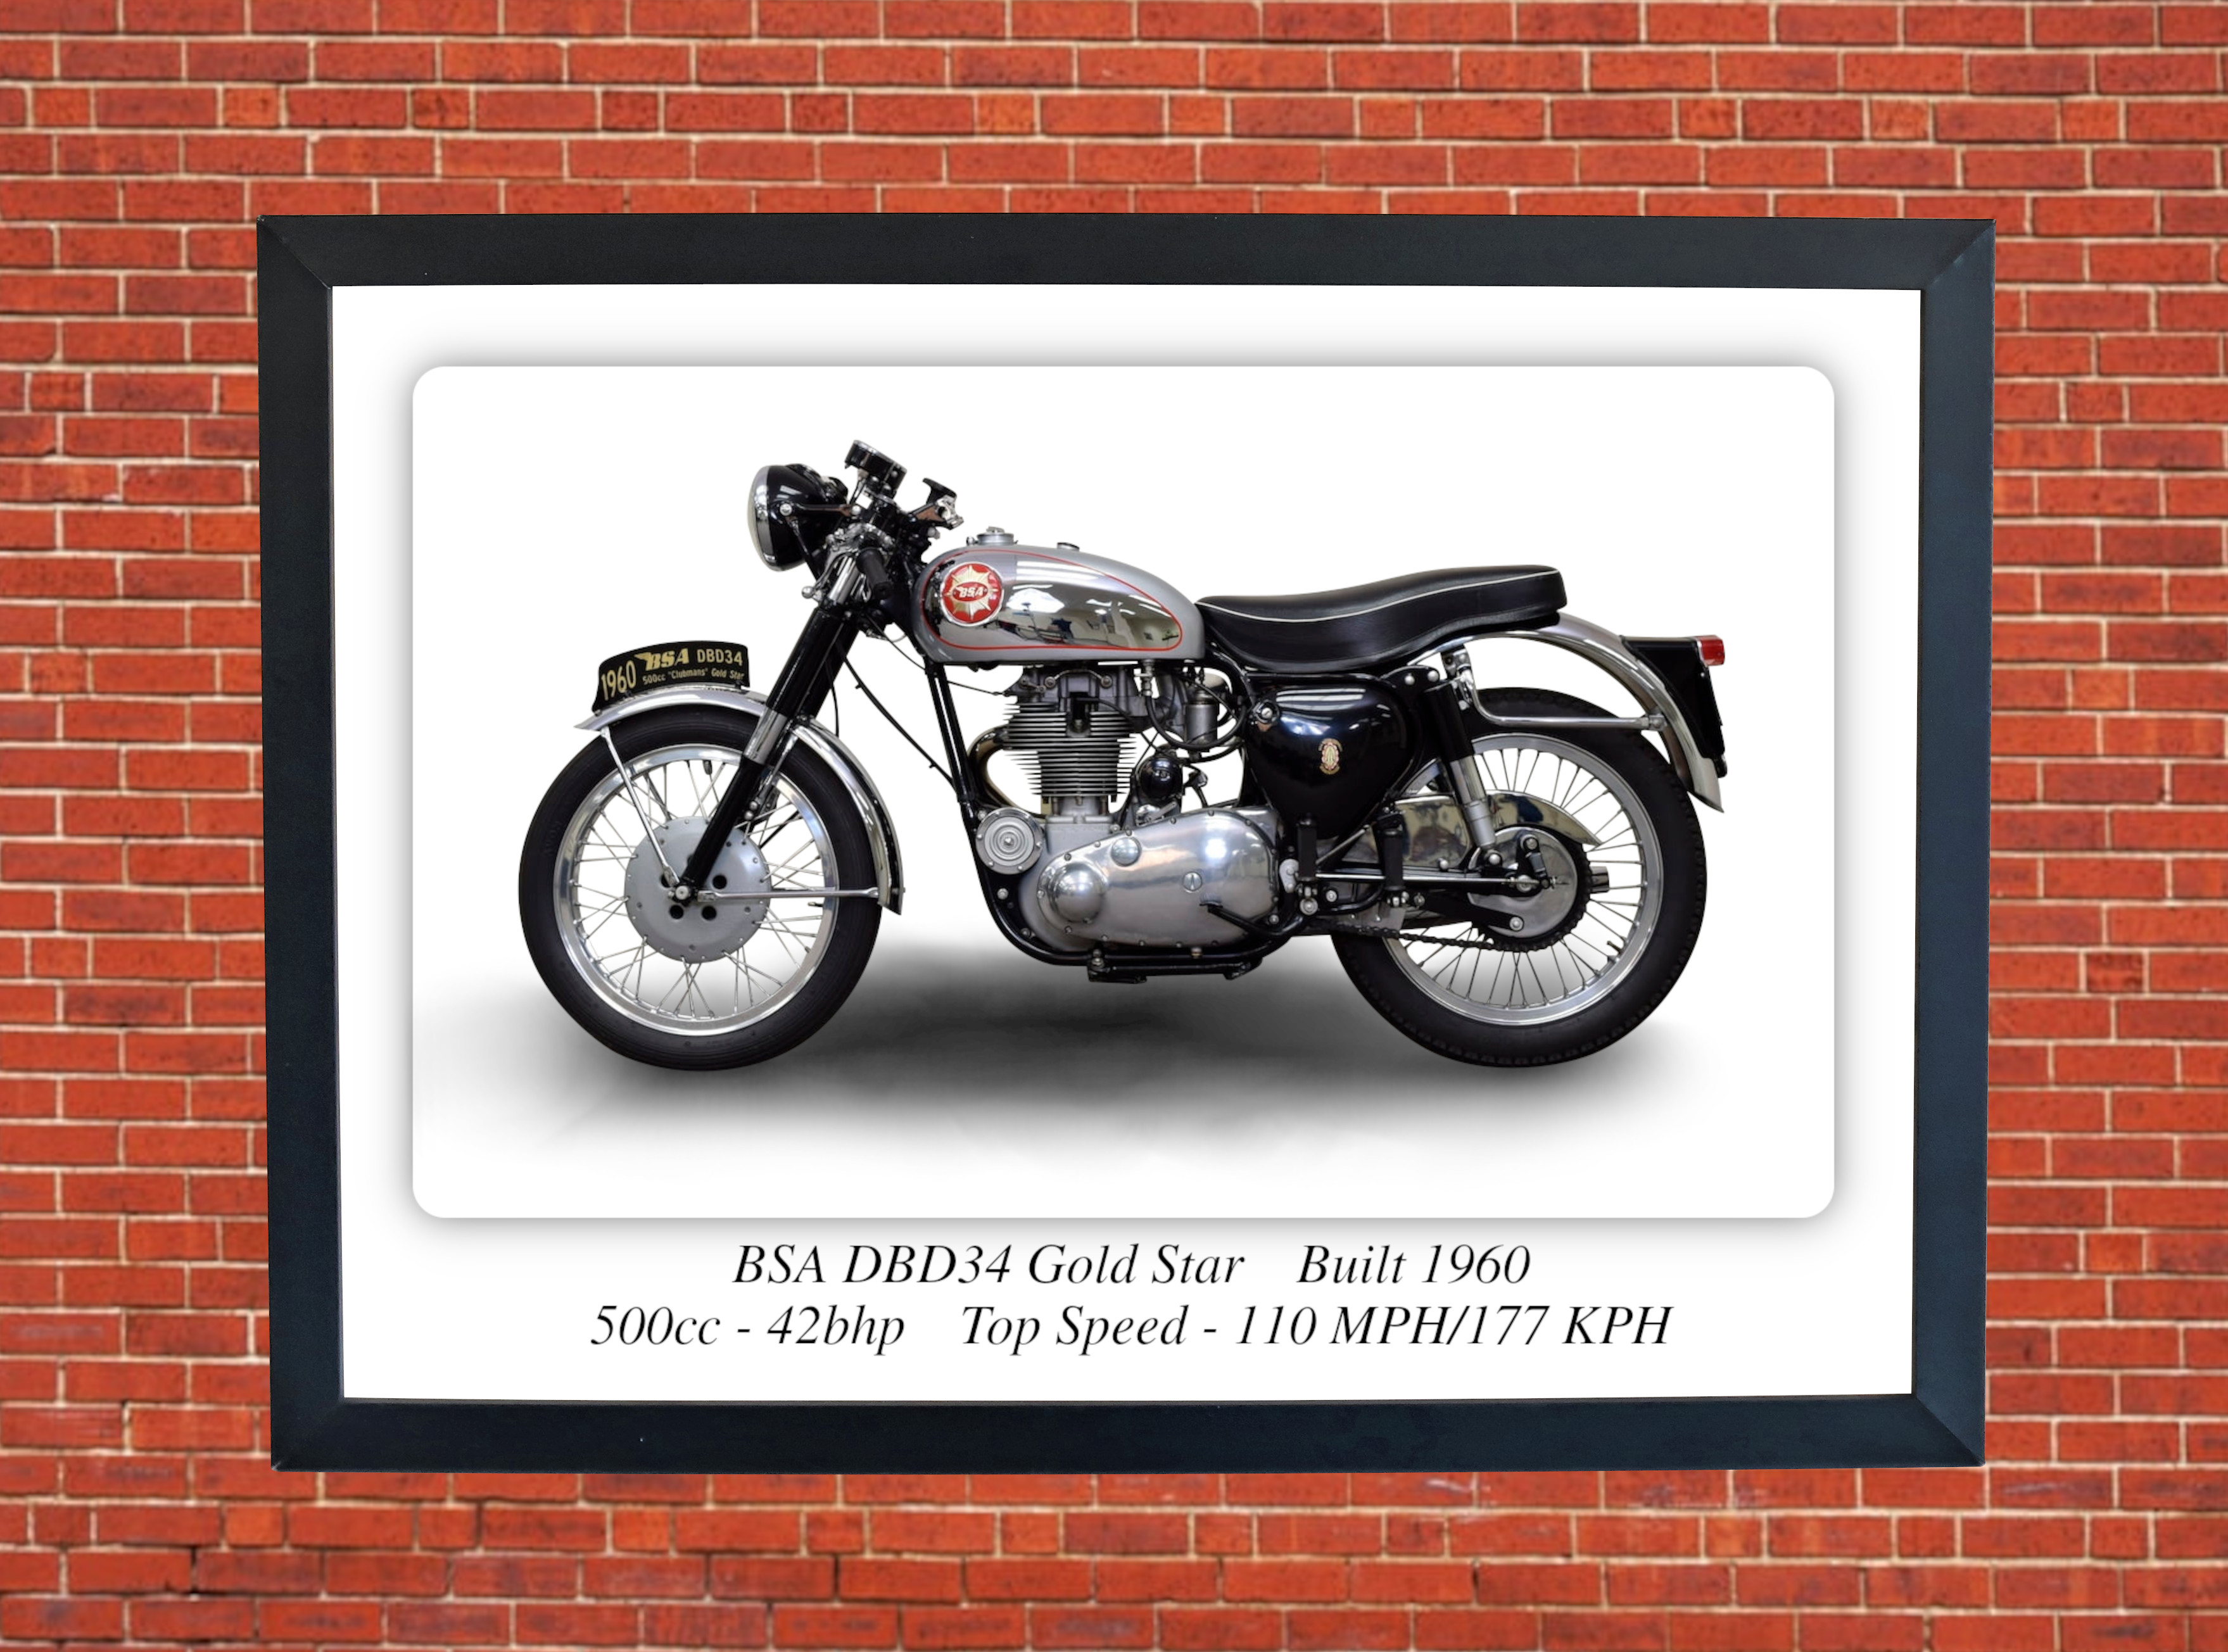 BSA DBD34 Gold Star Motorcycle - A3/A4 Size Print Poster